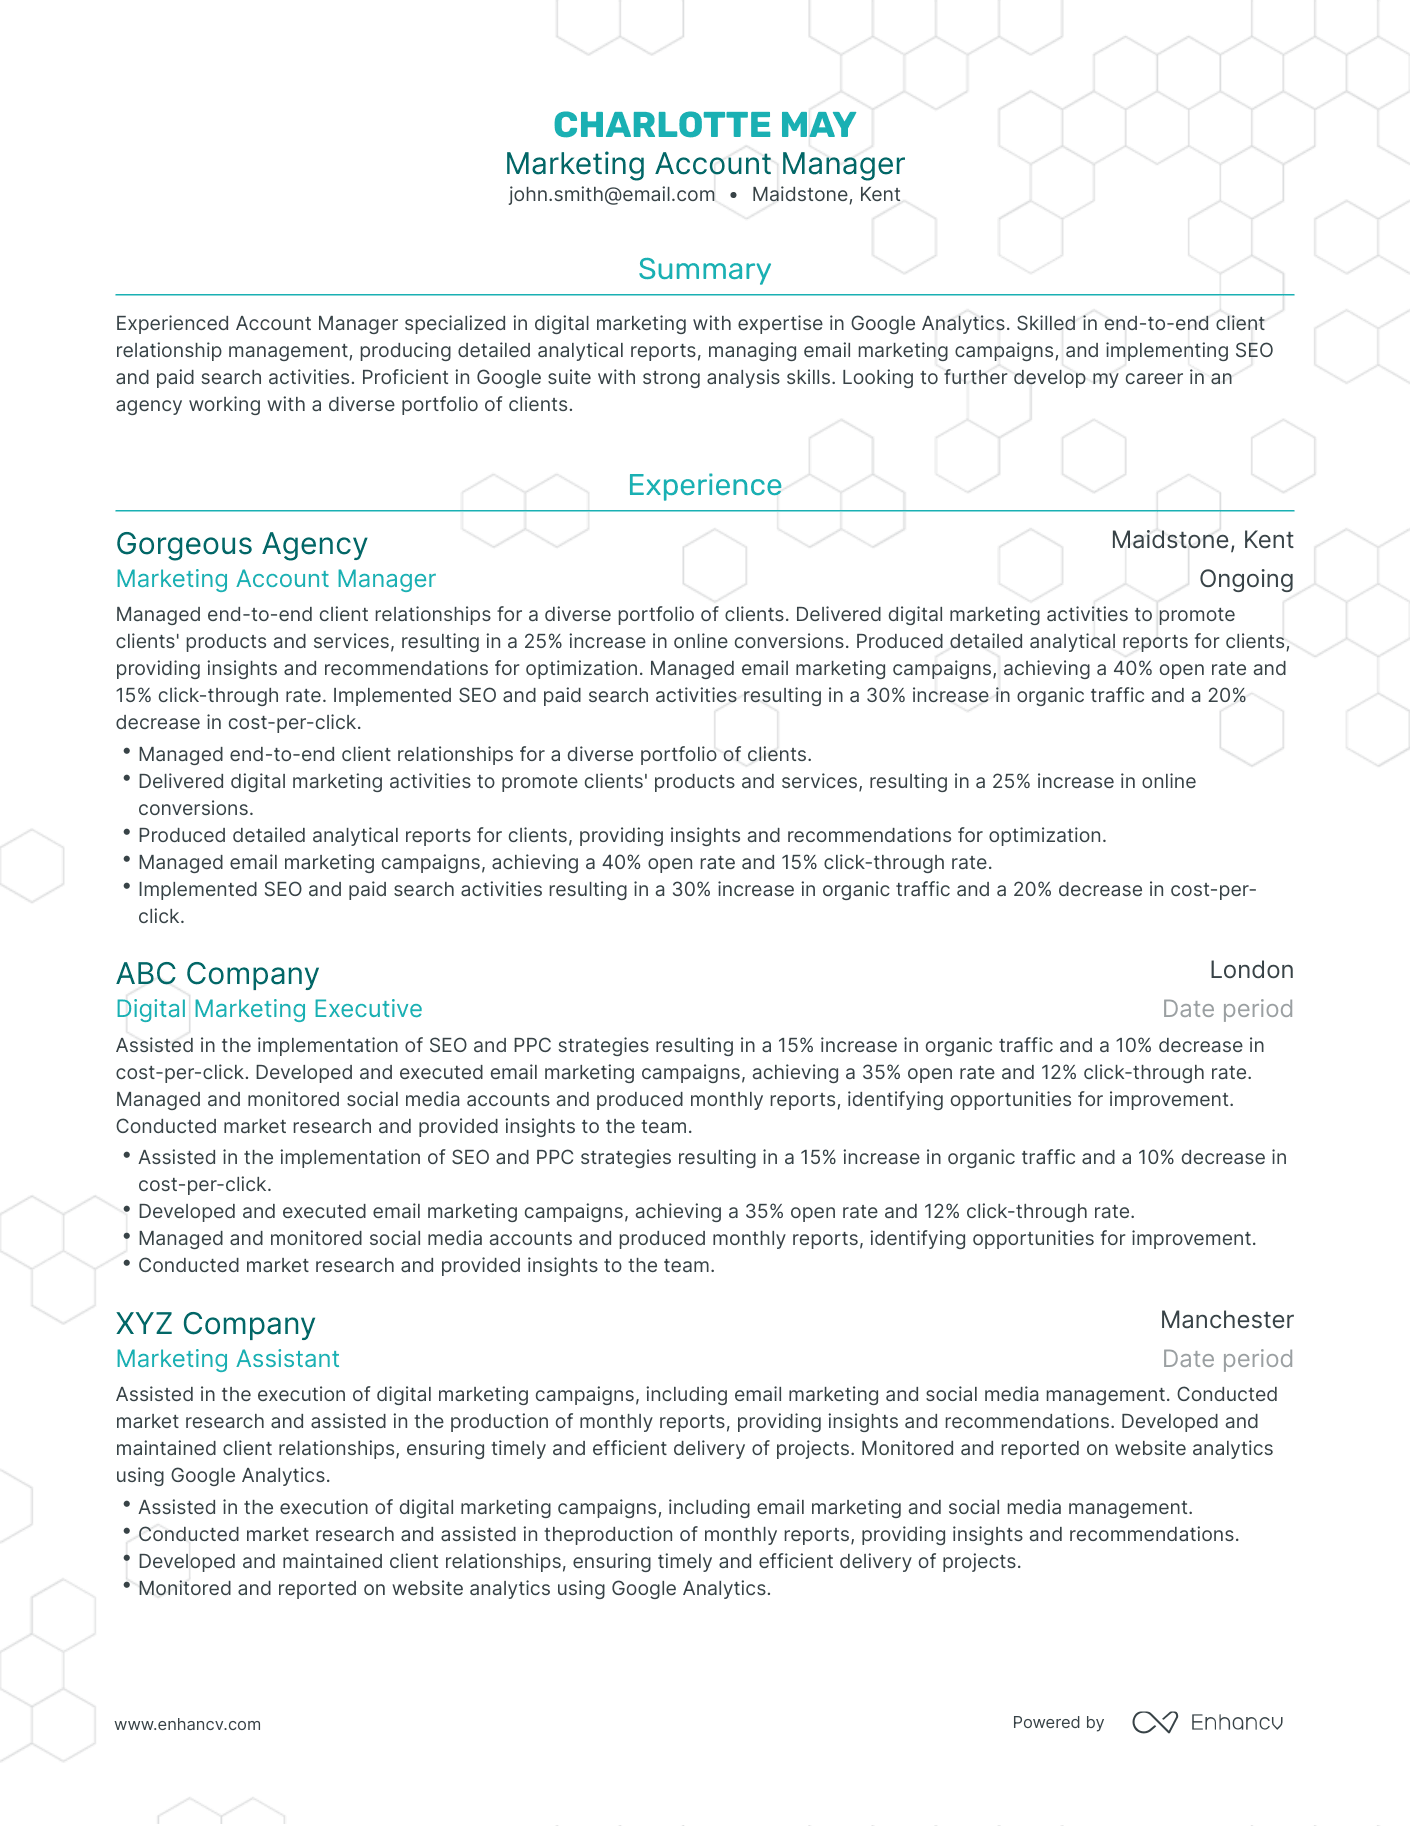 Traditional Marketing Account Manager Resume Template